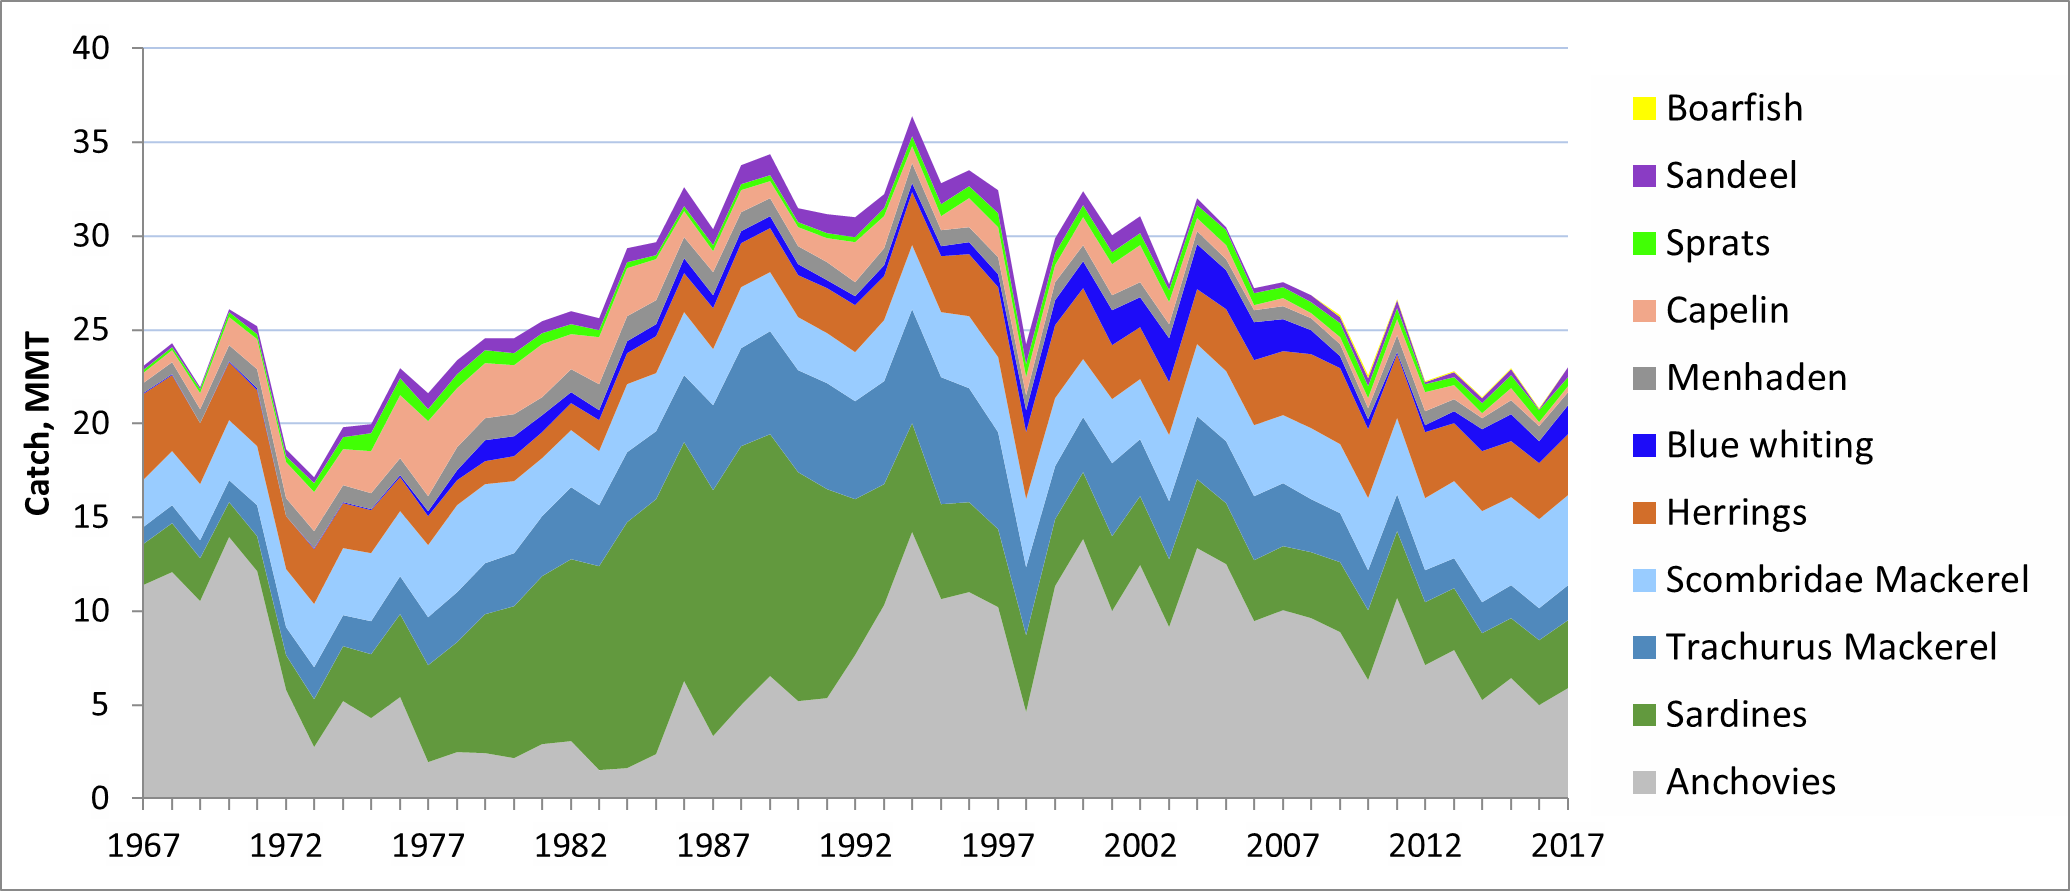 Chart showing global catches of species used for marine ingredients. Increasing trend from 1970 to 1994 and then declining